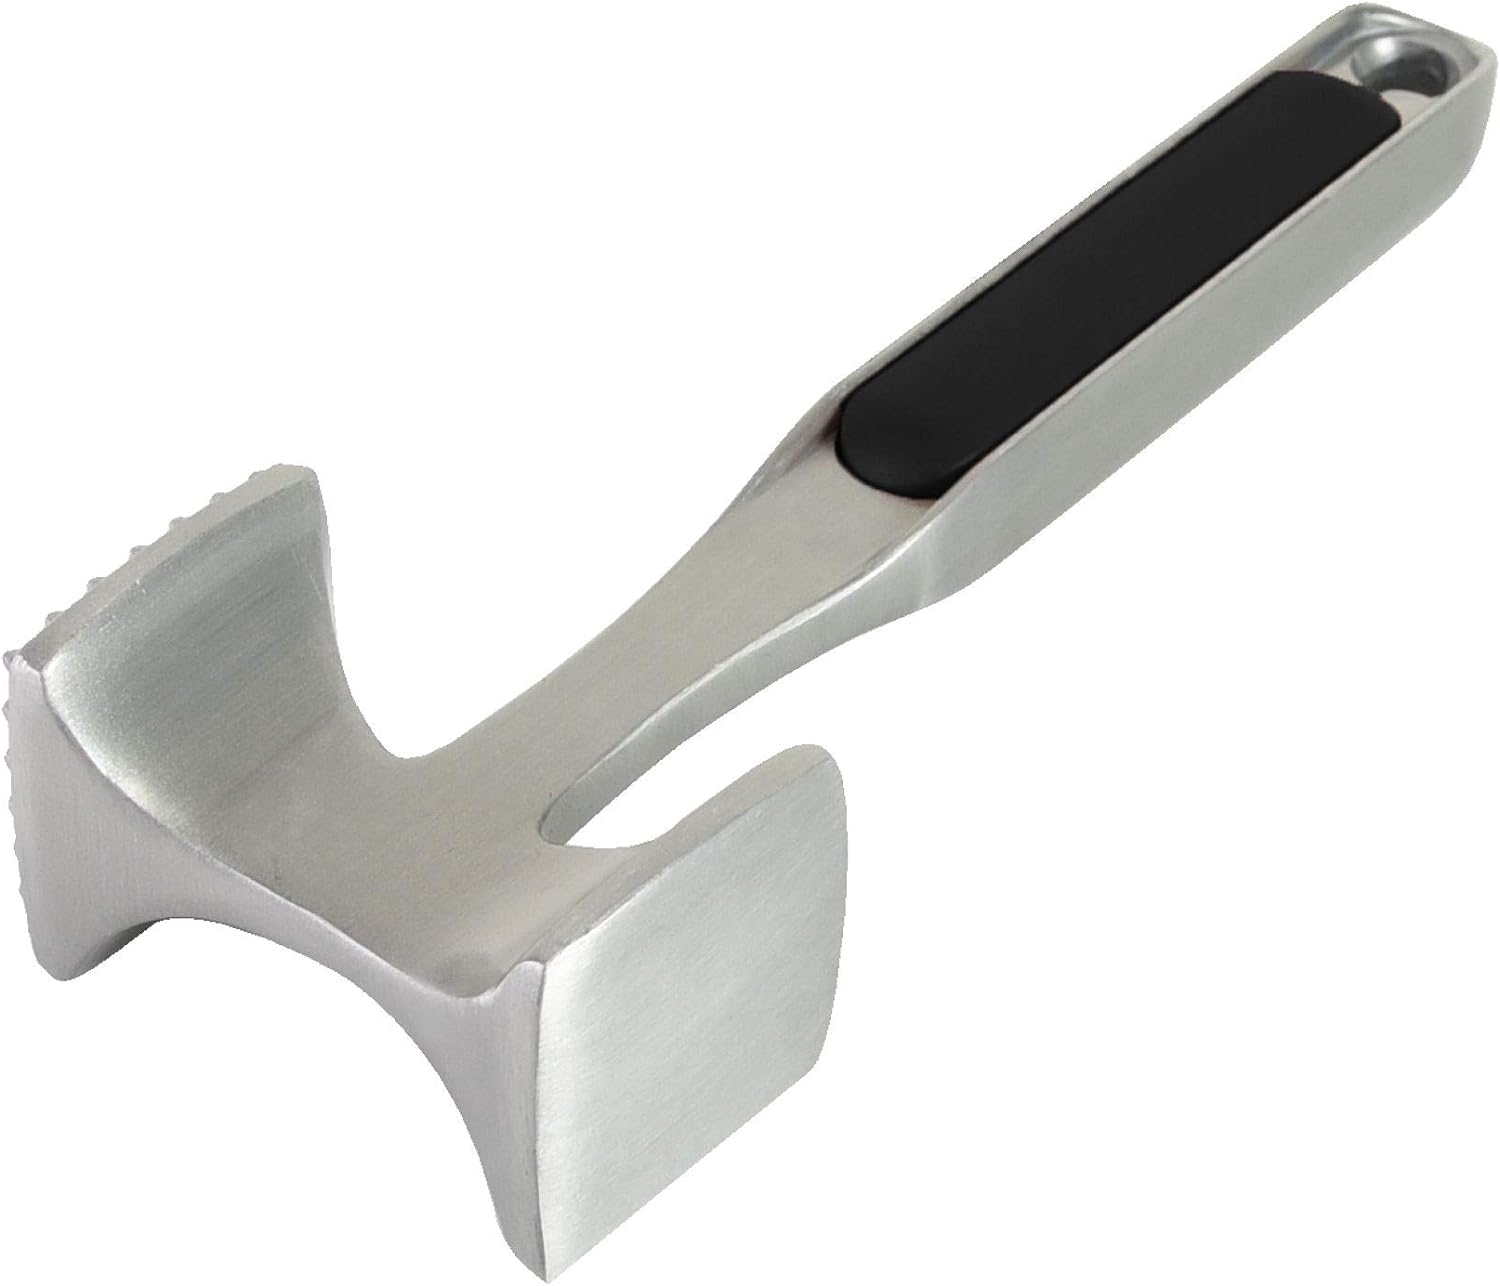 PLUS】Meat Tenderizer for All KitchenAid and Cuisinart Household